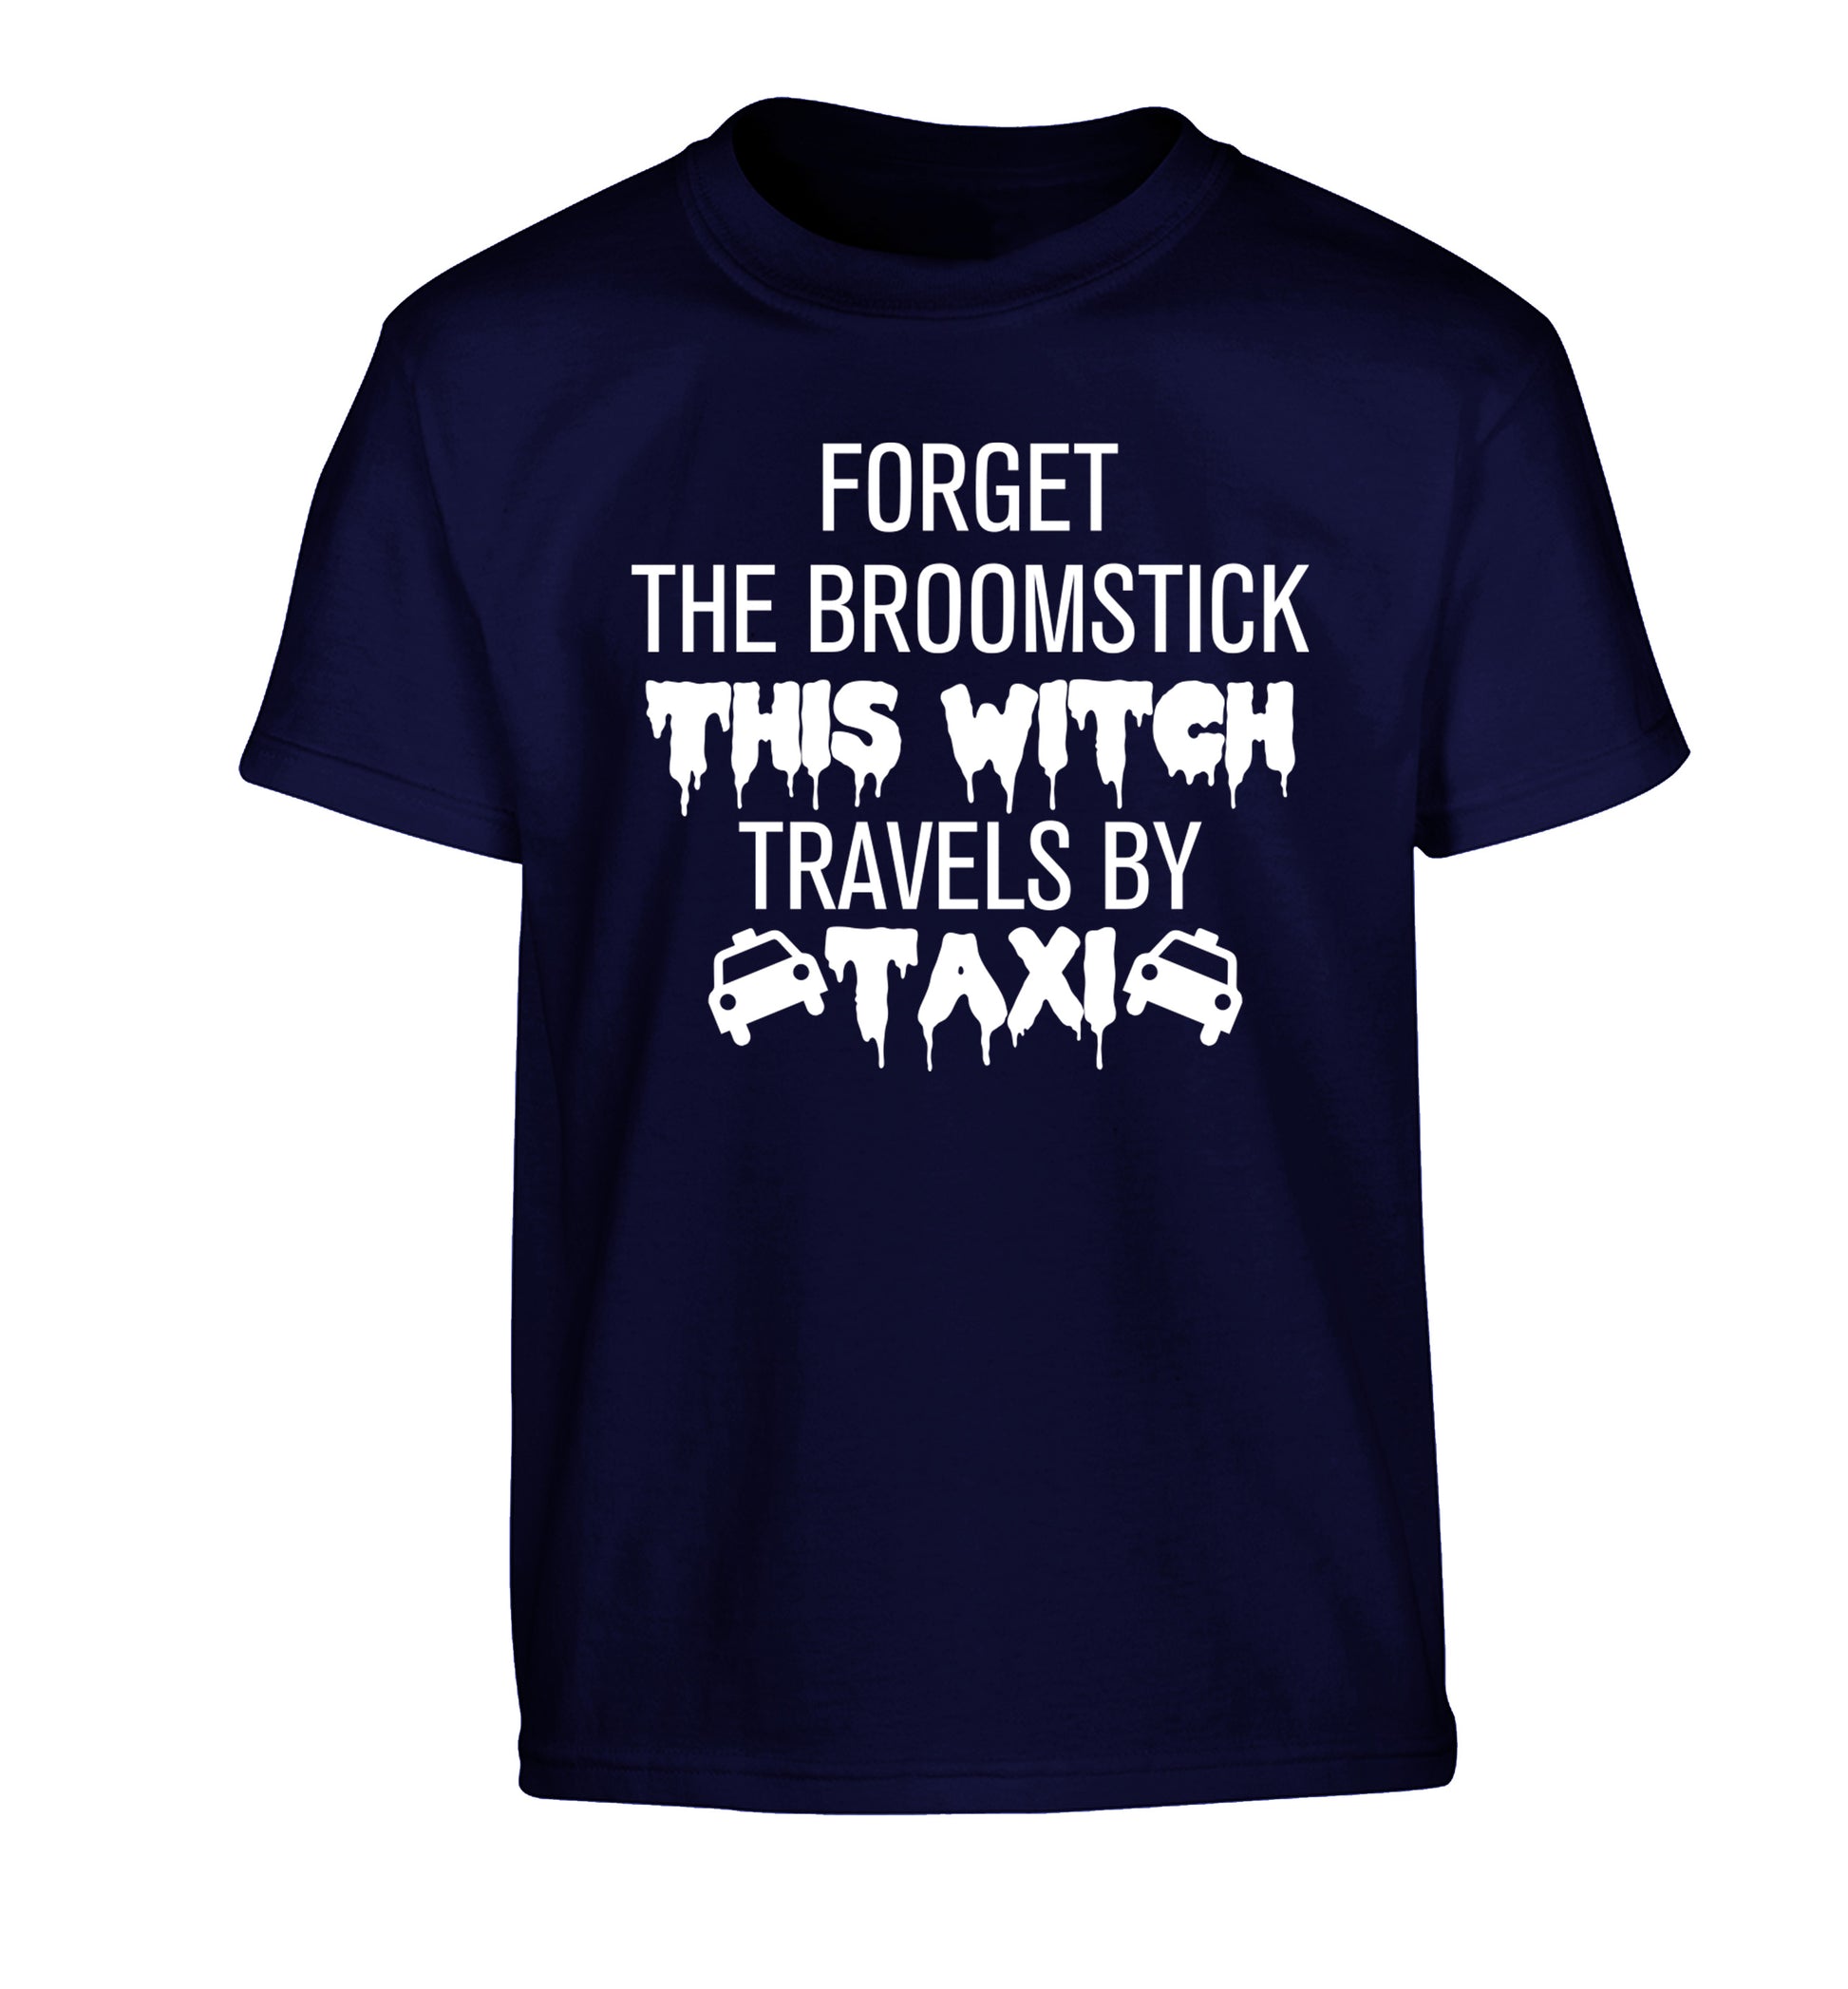 Forget the broomstick this witch travels by taxi Children's navy Tshirt 12-14 Years